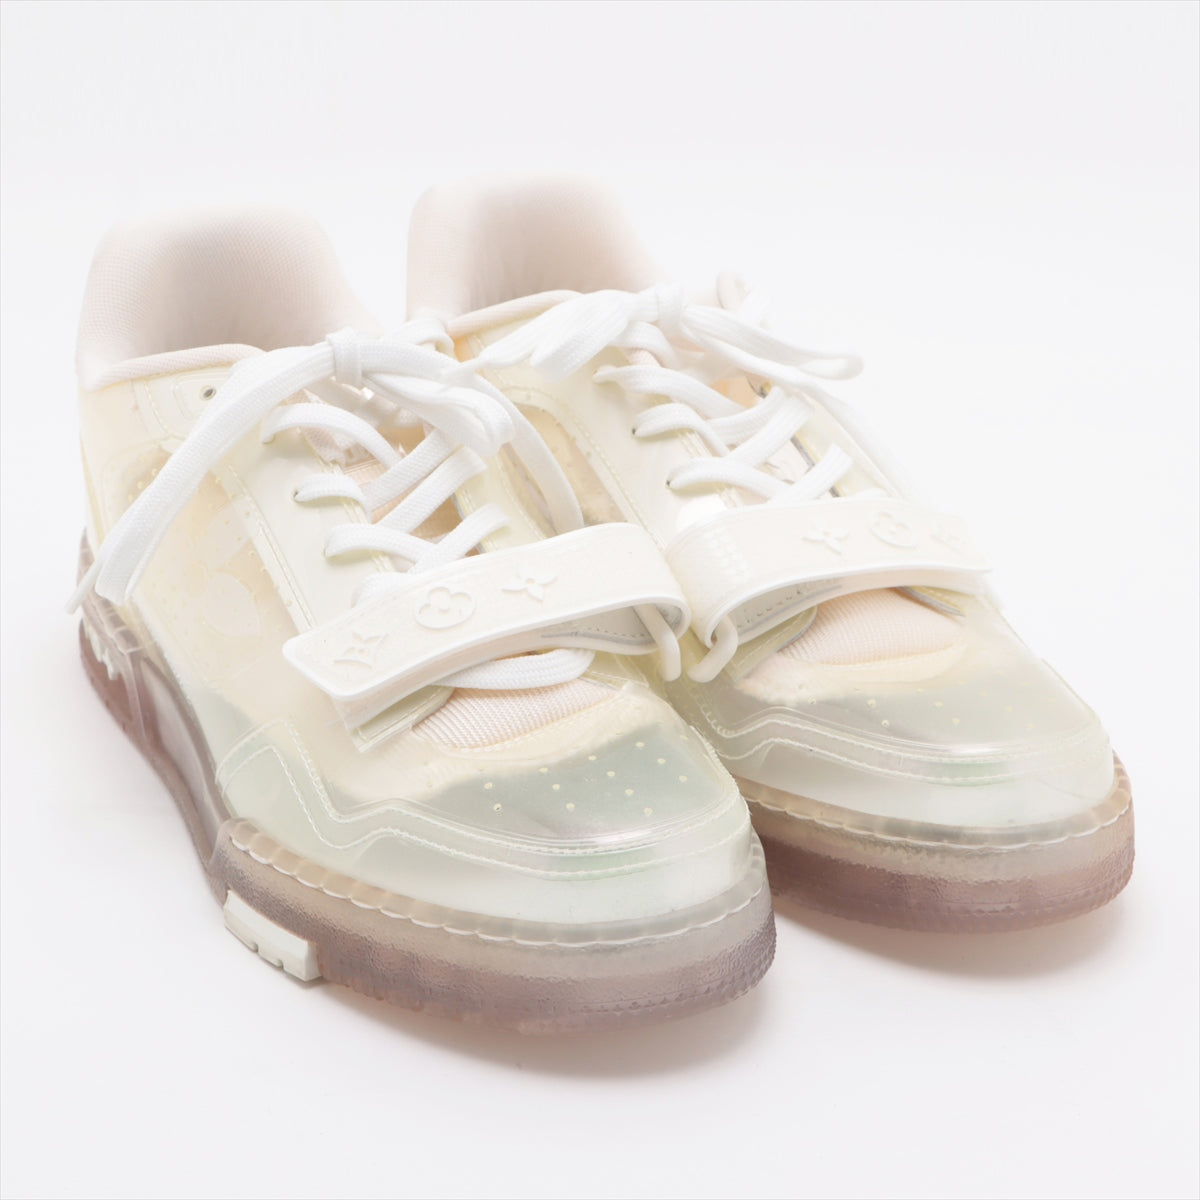 Louis Vuitton LV Trainer Line 21 years PVC Sneakers 7 Men's Ivory GO0251 Monogram Skeleton There is a bag